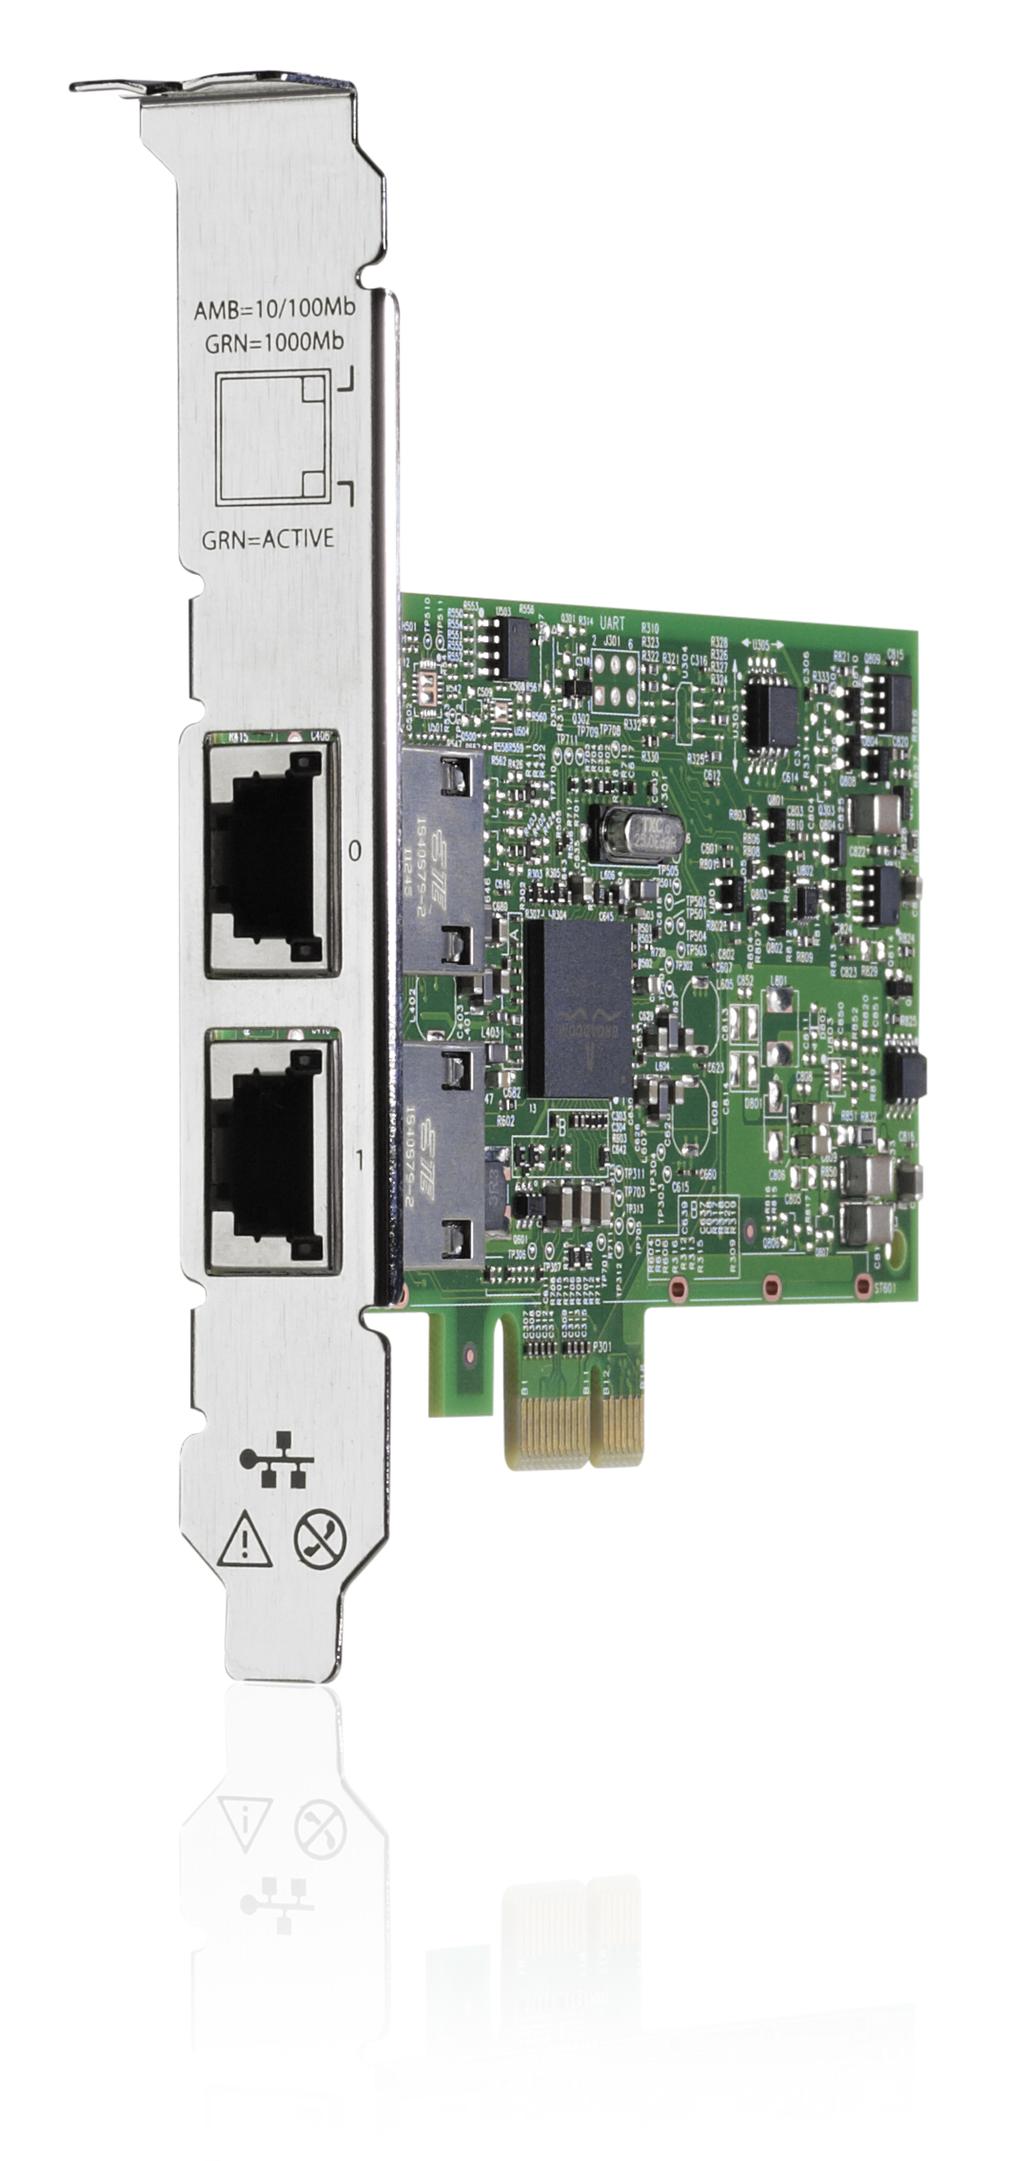 Overview Overview The HPE 332T is a dual-port, low-cost, low profile 1Gb adapter featuring the BCM5720 Broadcom single-chip solution in a PCIe 2.